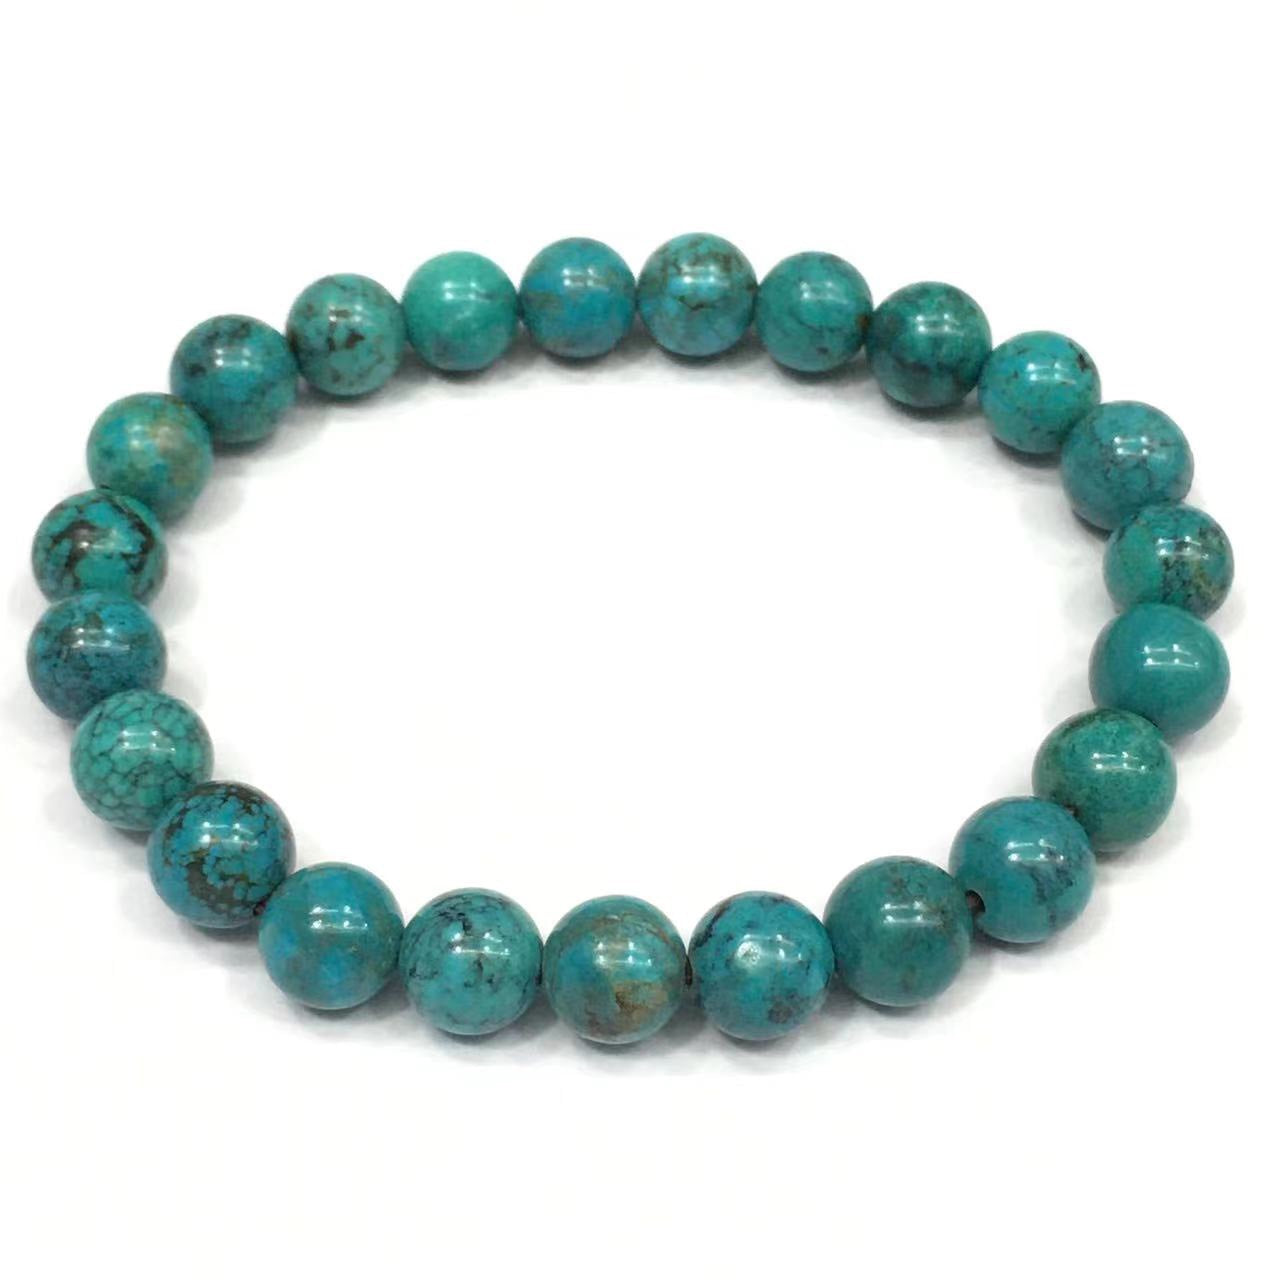 Genuine Chinese Turquoise 4x6mm  Round Beads Bracelet 8 inch long